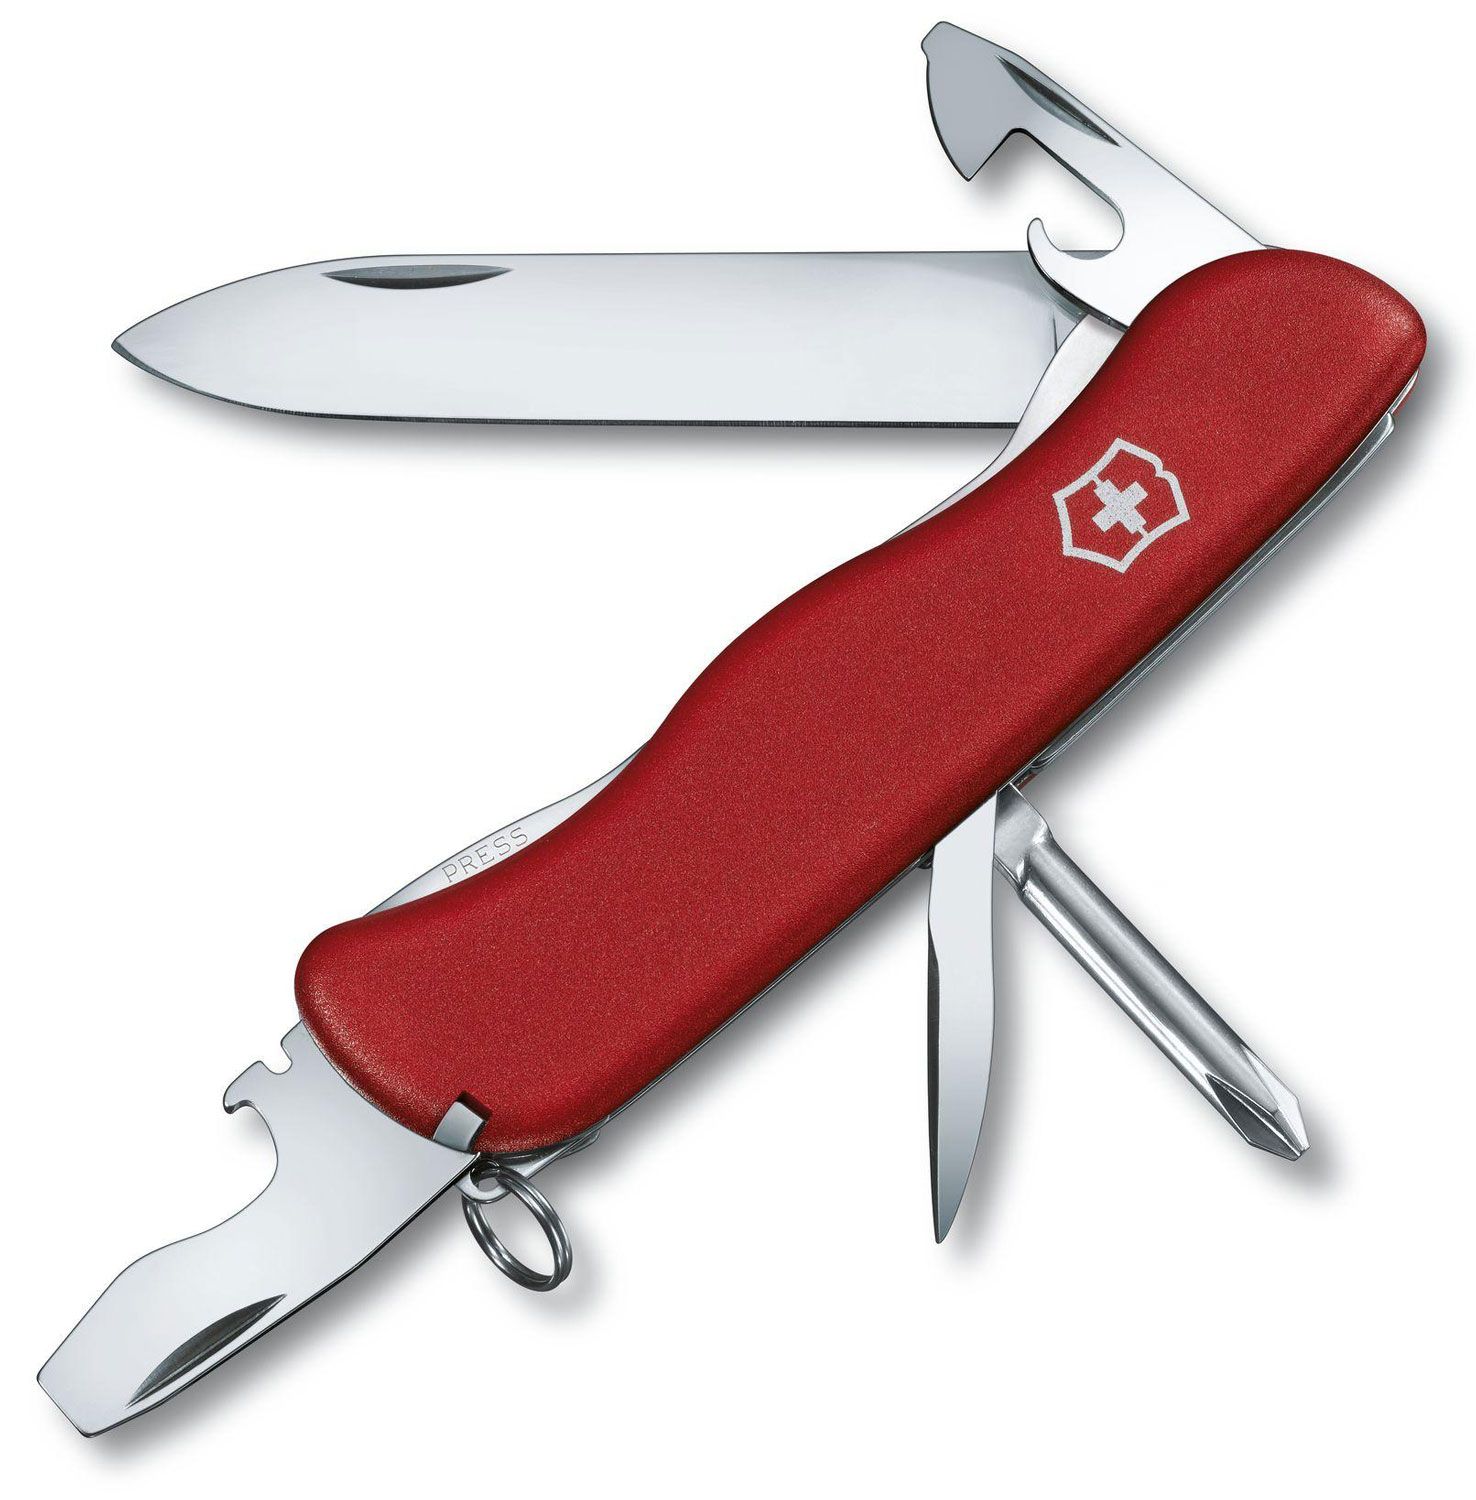  Victorinox Swiss Army Explorer Pocket Knife with Leather  Pouch, Red, 91mm : Folding Camping Knives : Sports & Outdoors